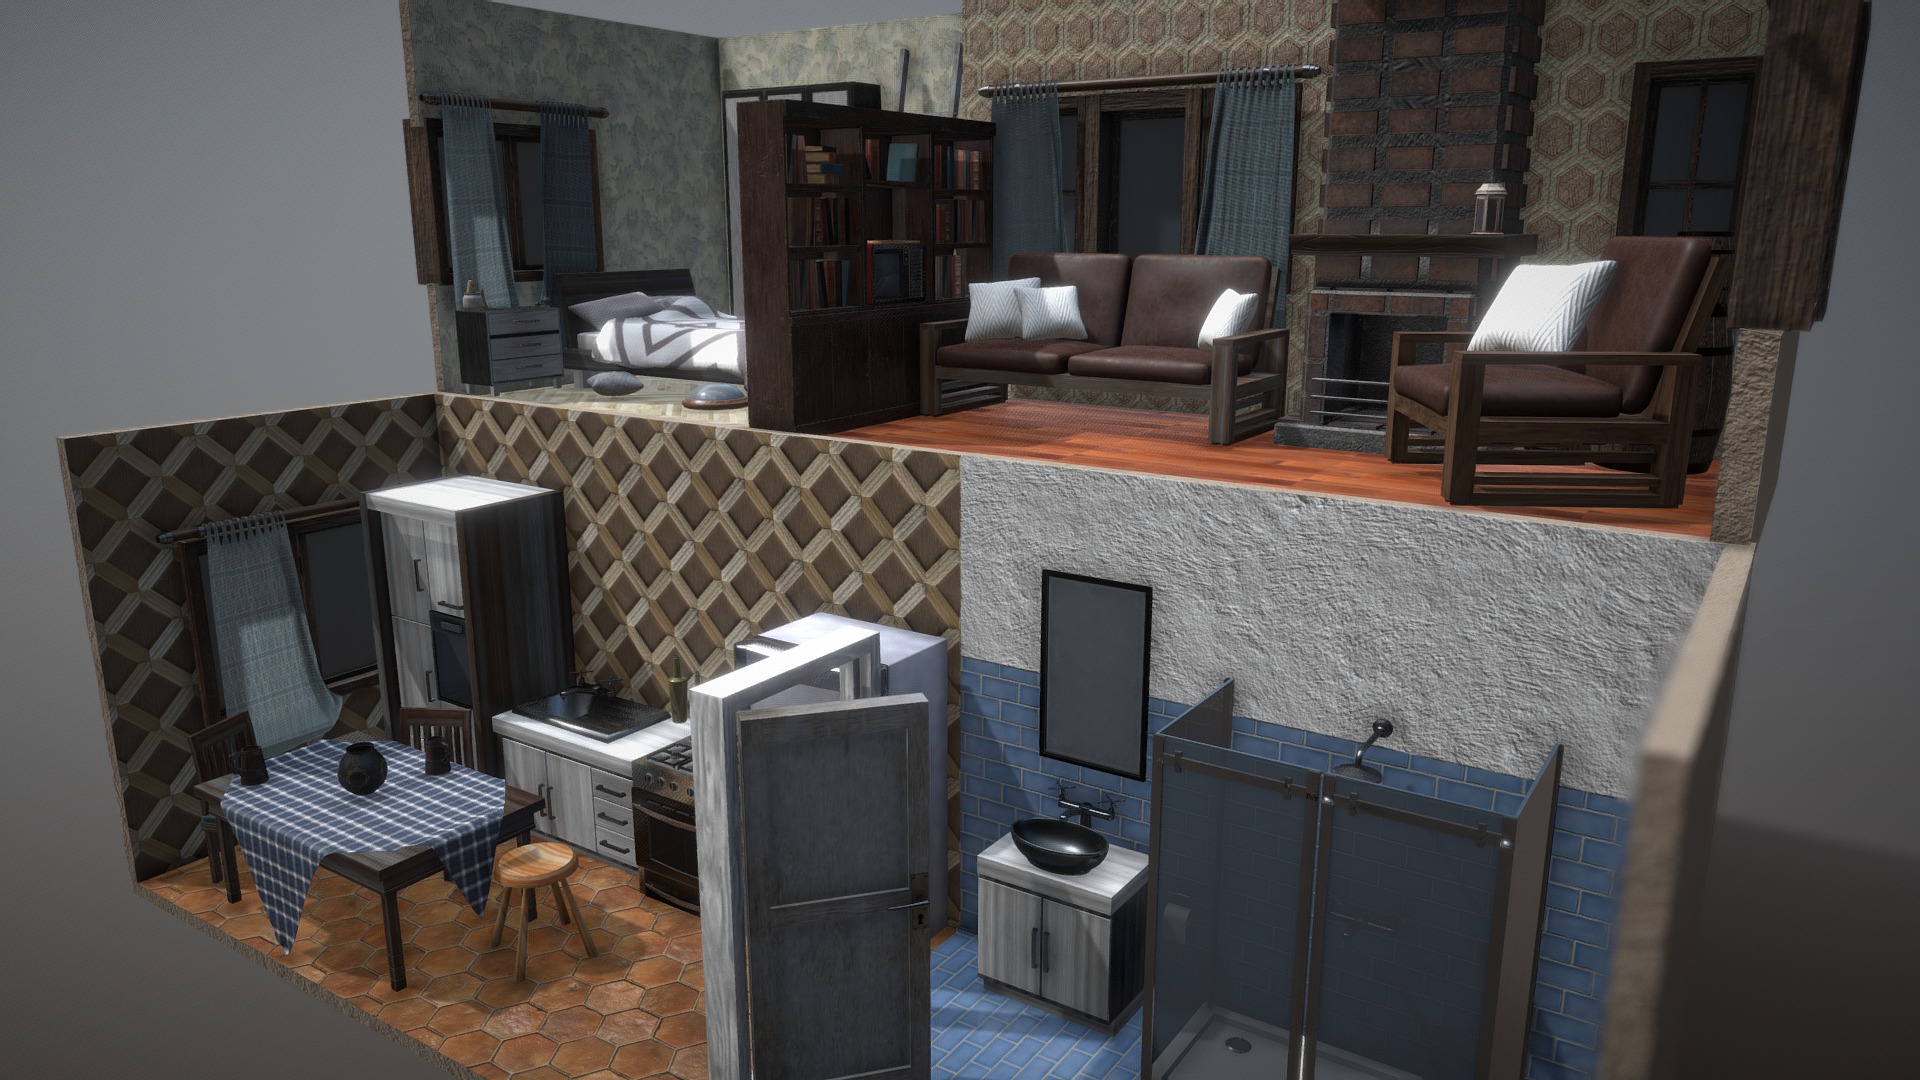 3D model Rooms - This is a 3D model of the Rooms. The 3D model is about a room with a fireplace and furniture.